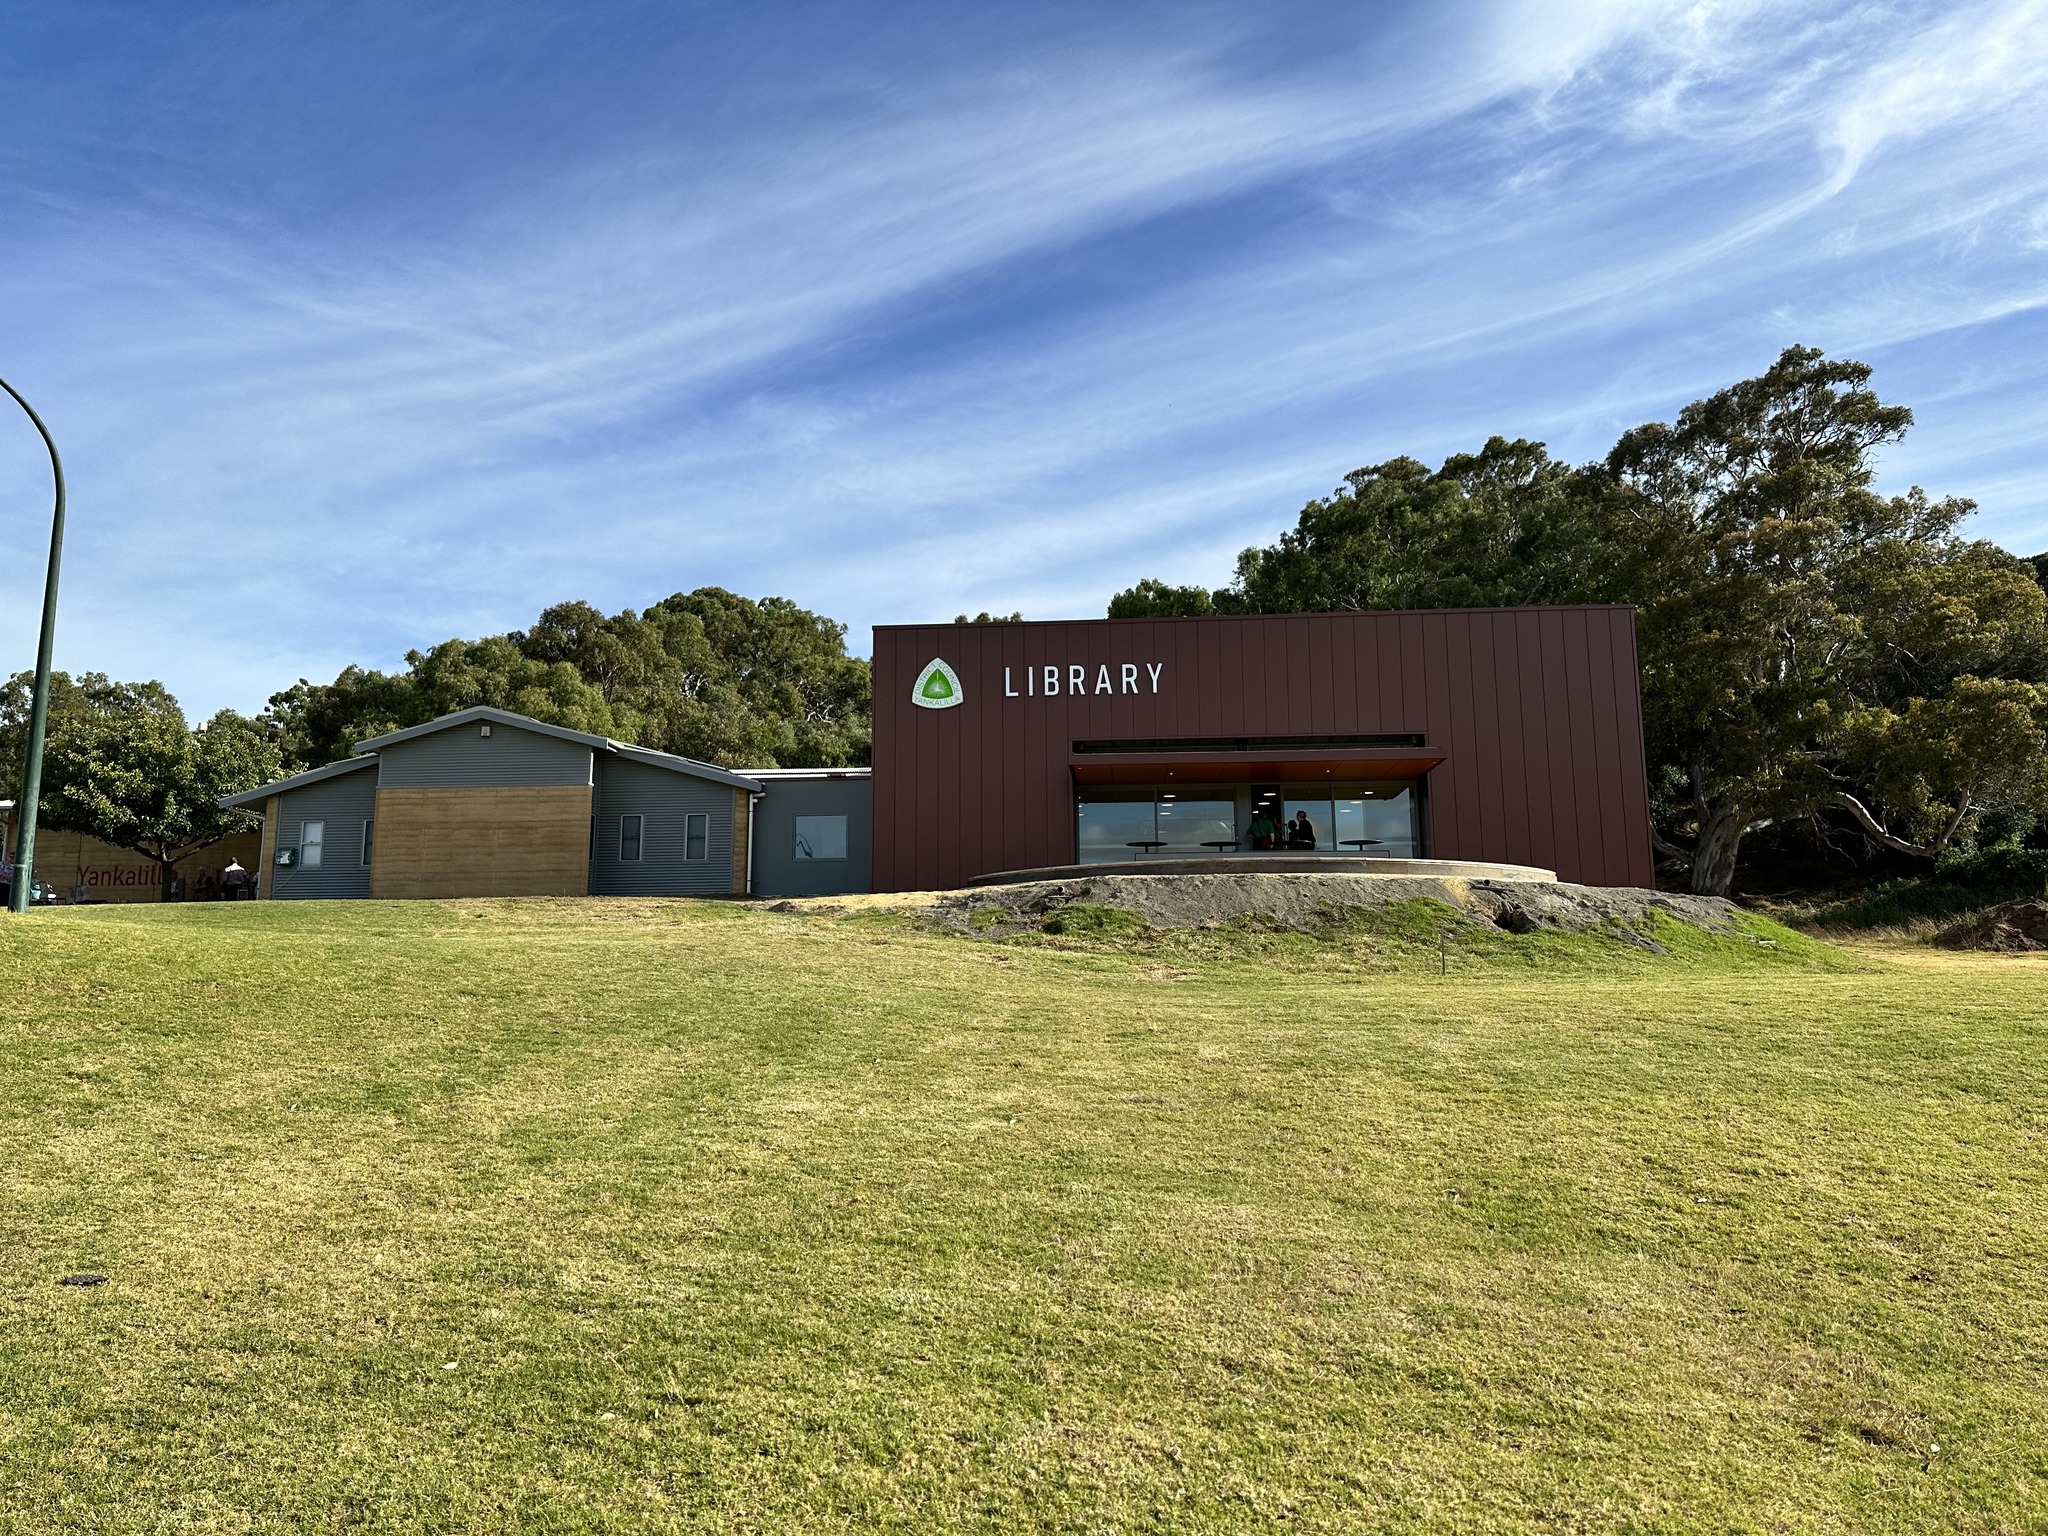 Rebekha Sharkie MP: It’s so exciting to see the Yankalilla Cultural Centre & Libr…